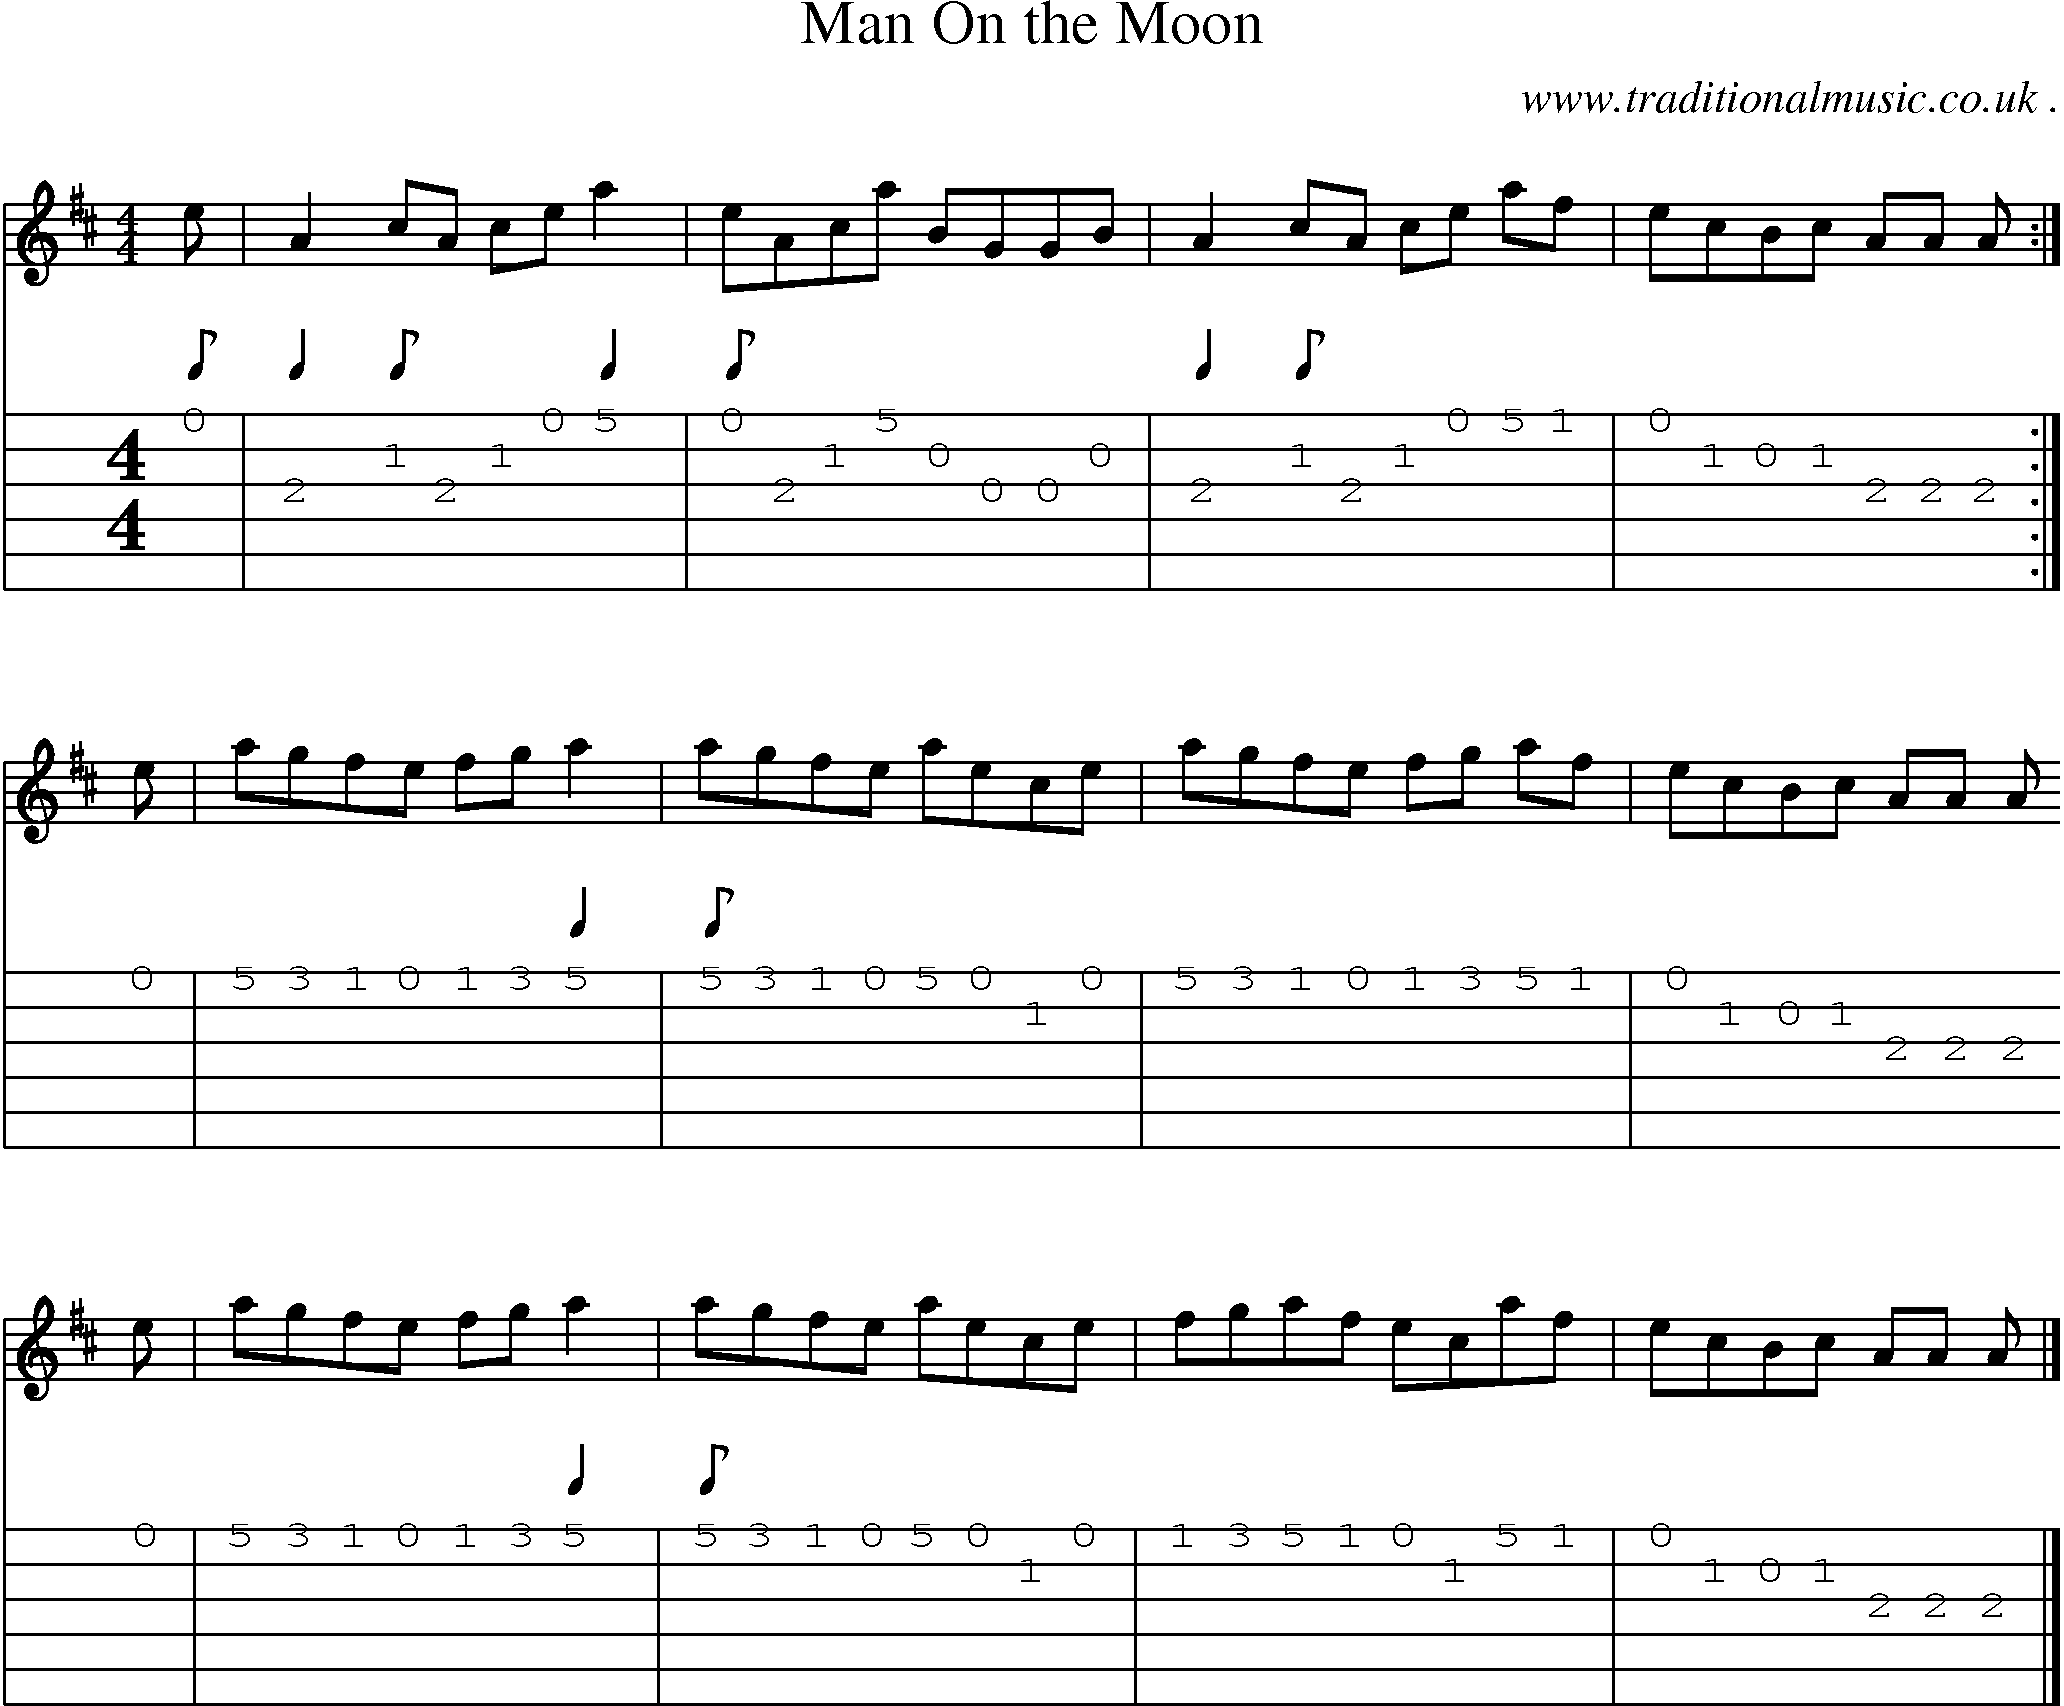 Sheet-music  score, Chords and Guitar Tabs for Man On The Moon